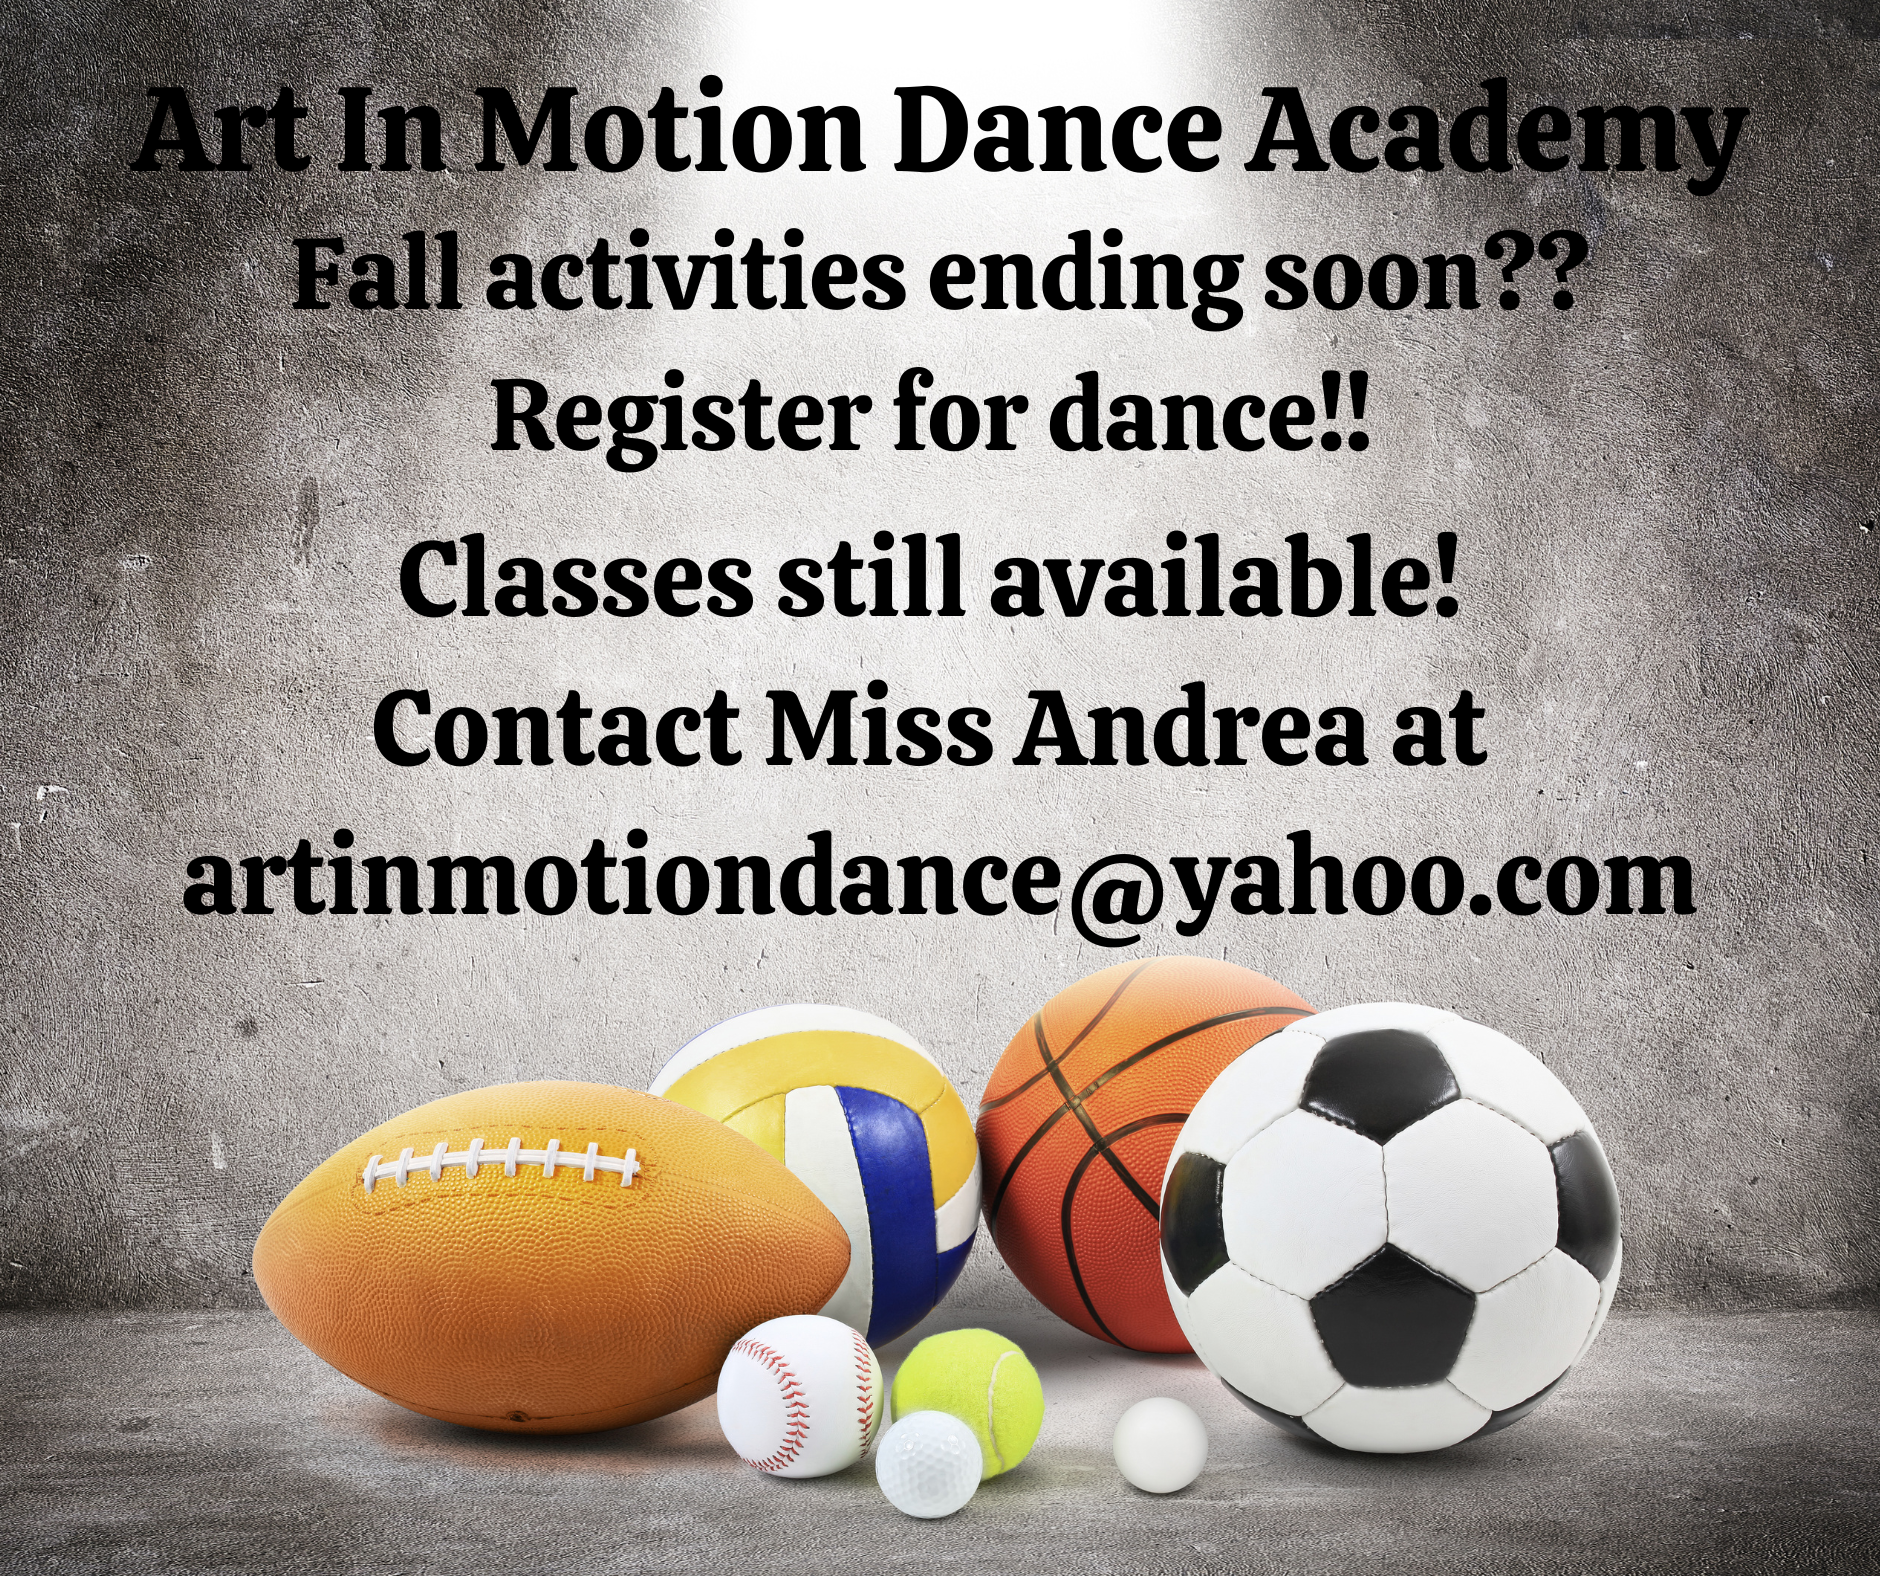 Fall activities ending soon? Register for dance! Contact artinmotiondance@yahoo.com